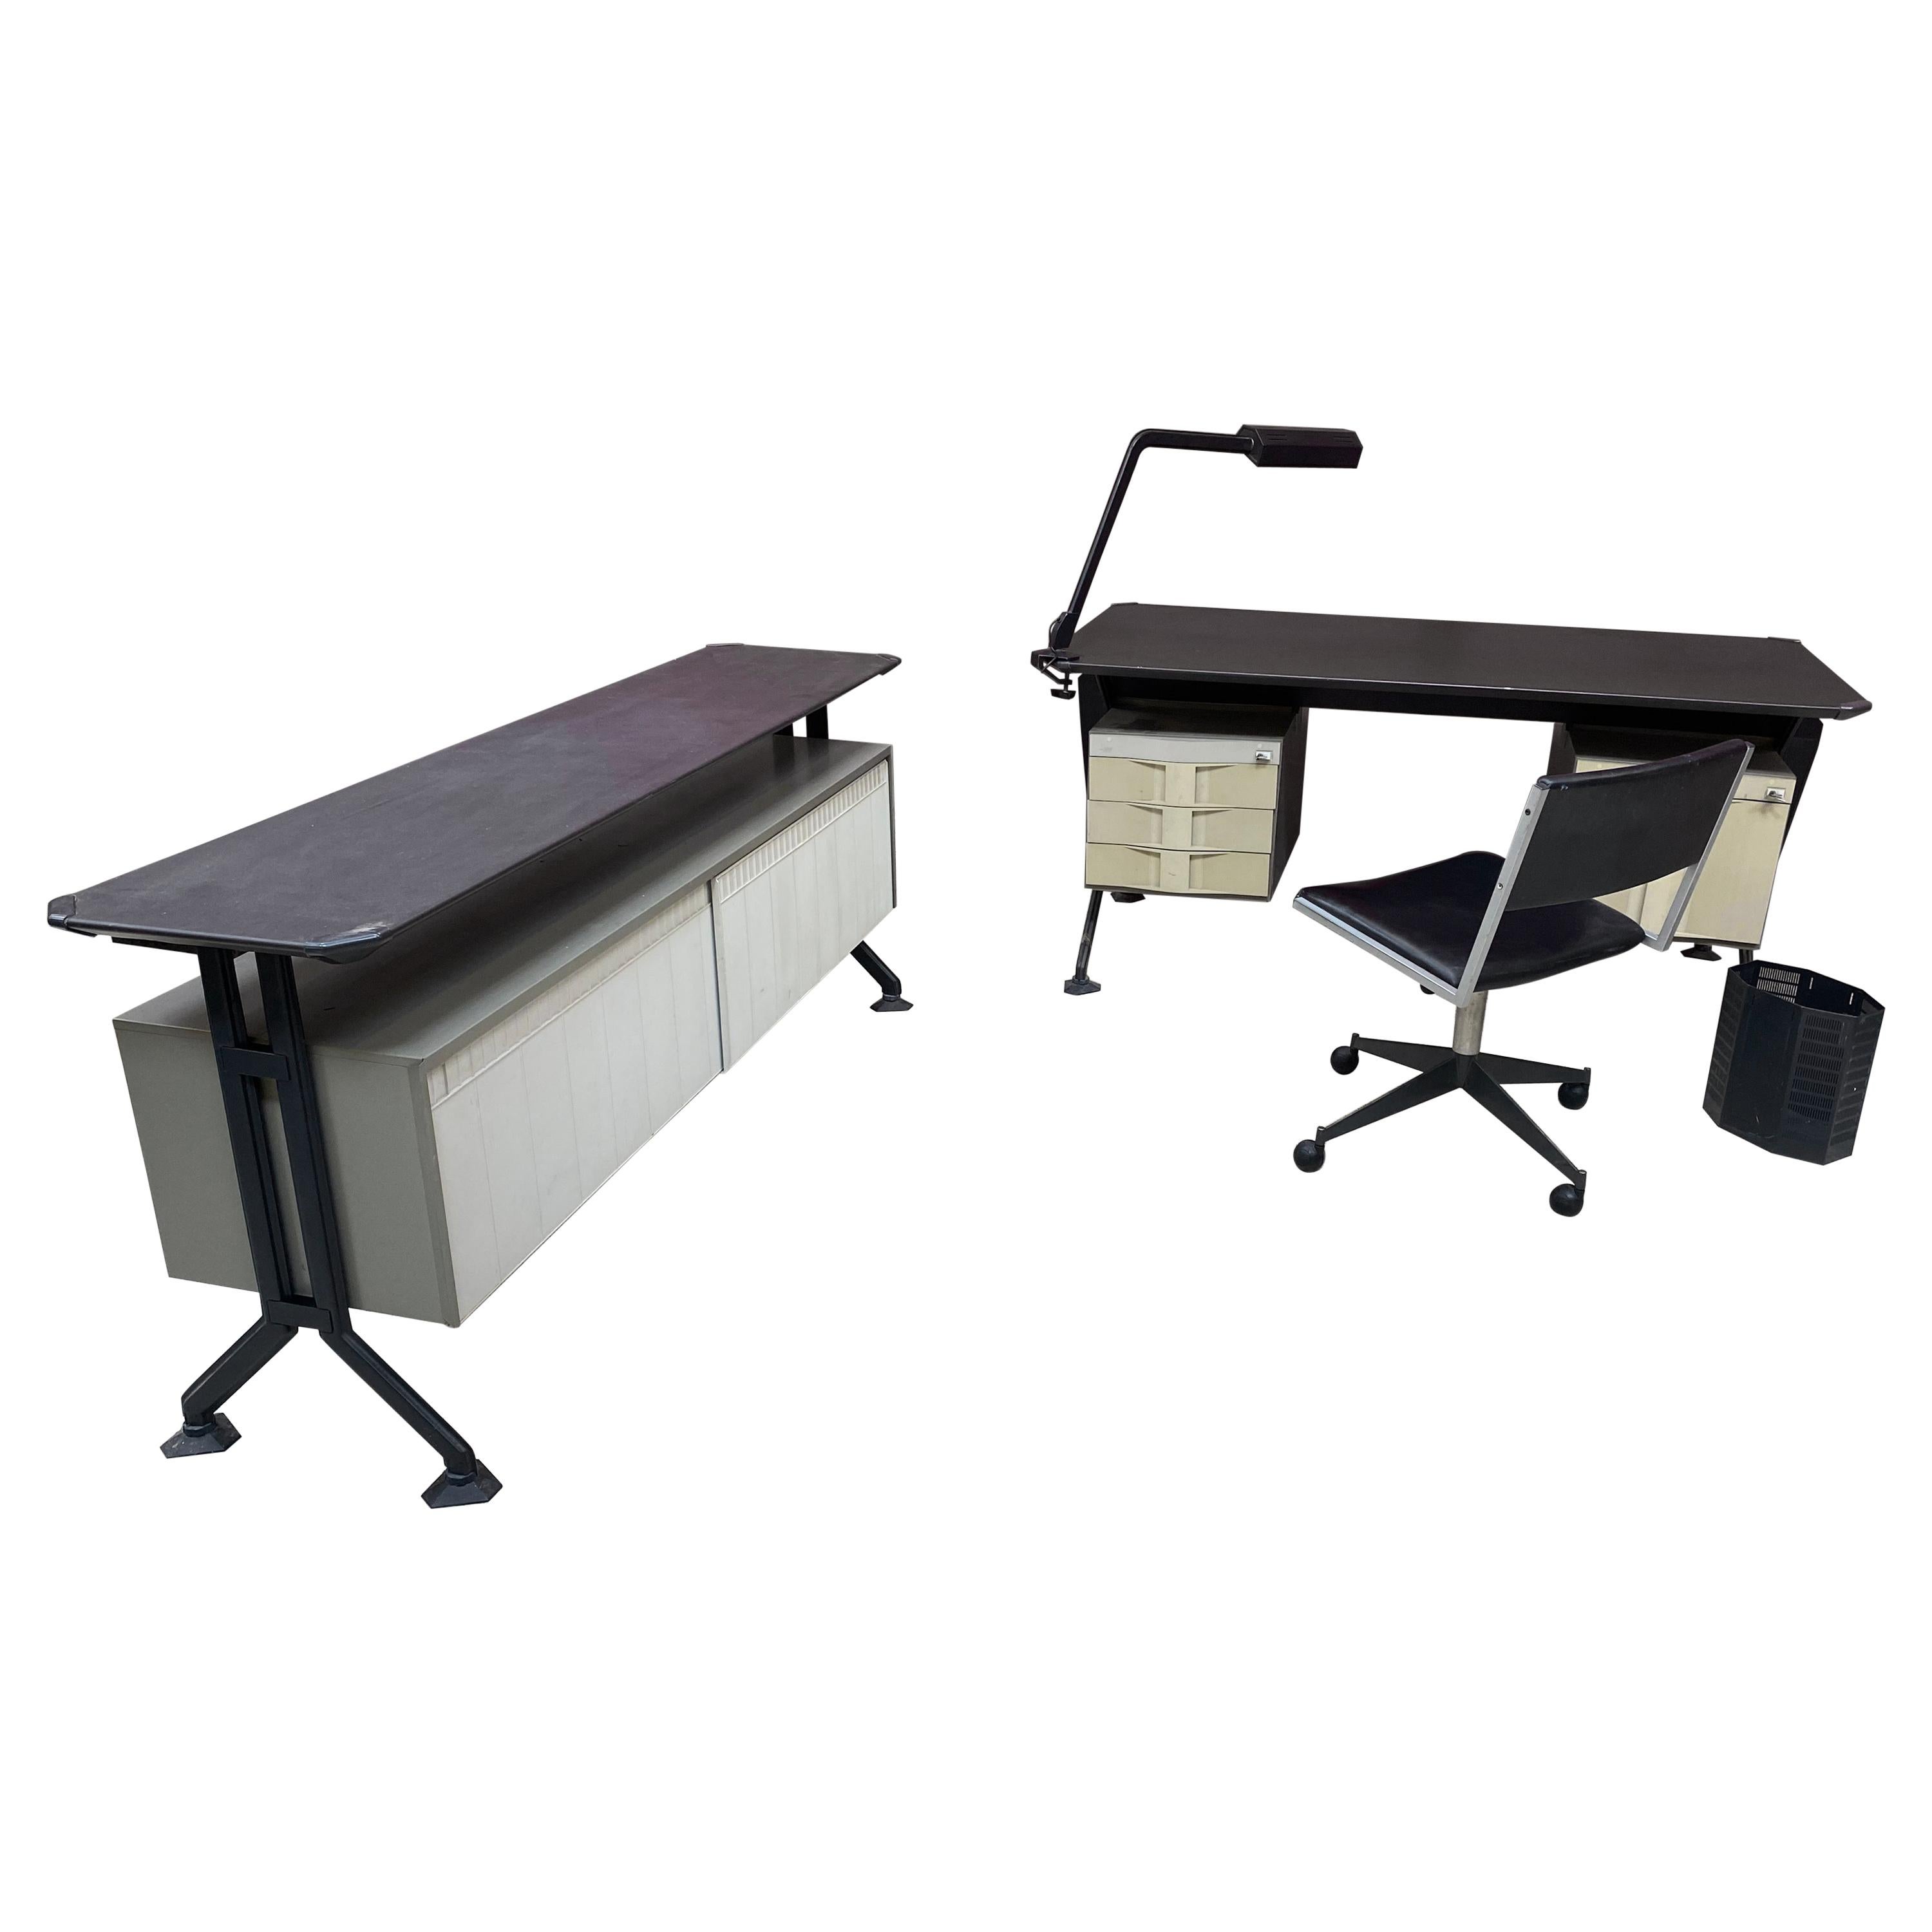 Rare Desk Set by BBPR for Olivetti Synthesis, circa 1960 For Sale